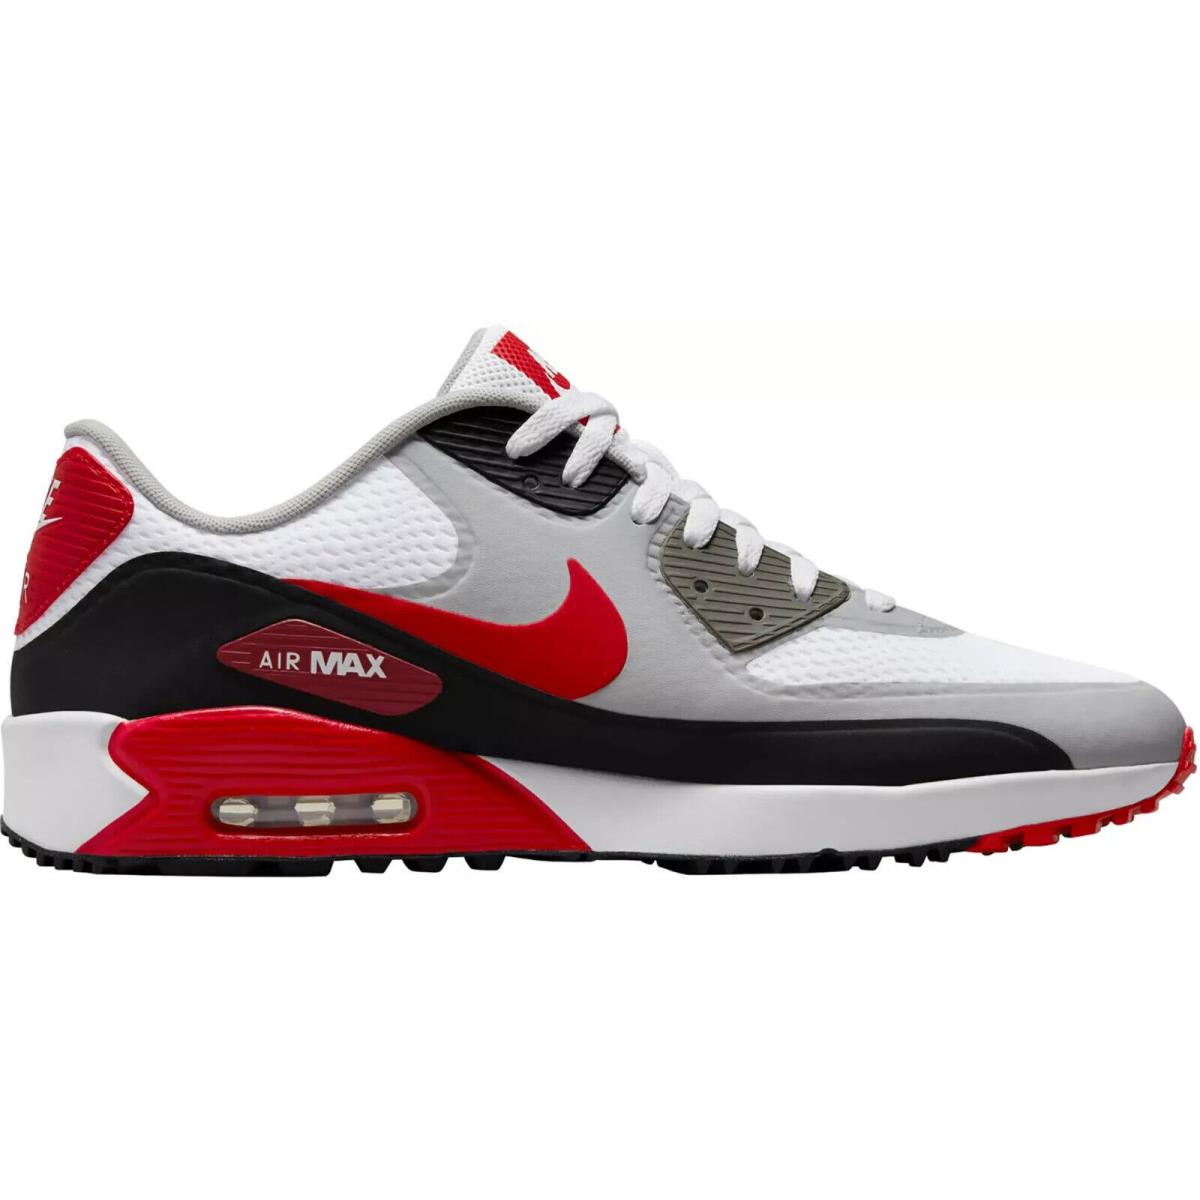 Golf Nike Air Max 90 G Men`s Shoes All Colors US Szs 7-13 White/Black/Photon Dust/University Red